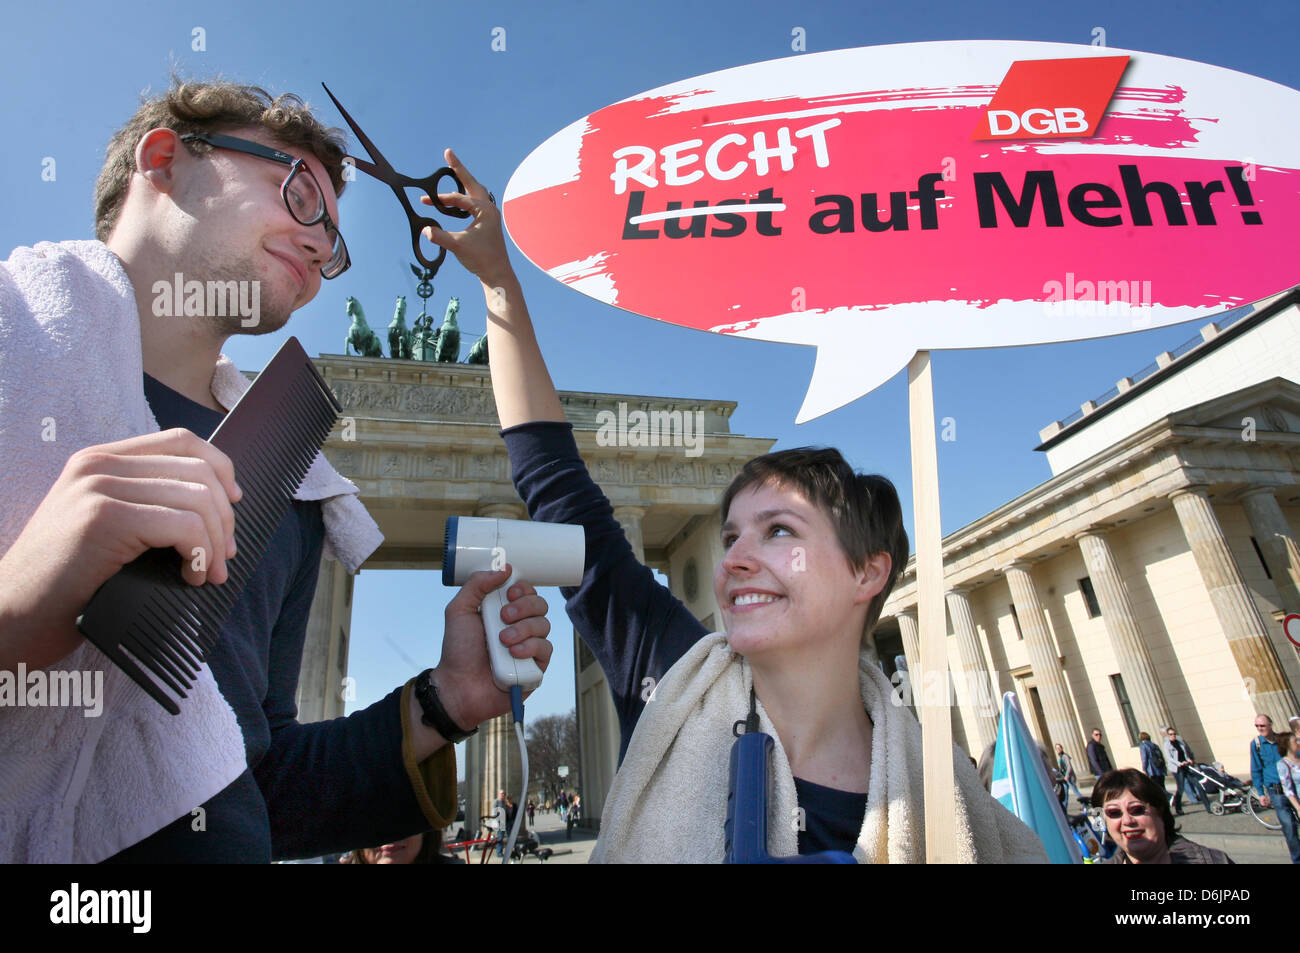 Two protesters dressed as hairdressers hold up a sign which reads 'Recht auf Mehr!' (Rights to more!) during the 'Equal Pay Day' rally in front of the Brandenburg Gate in Berlin, Germany, 23 March 2012. The rally took place on the occasion of the International Women's Day under the motto 'Recht statt billig - Entgeldgleichheit gesetzlich regeln' (Equal rights instead of cheap - for Stock Photo